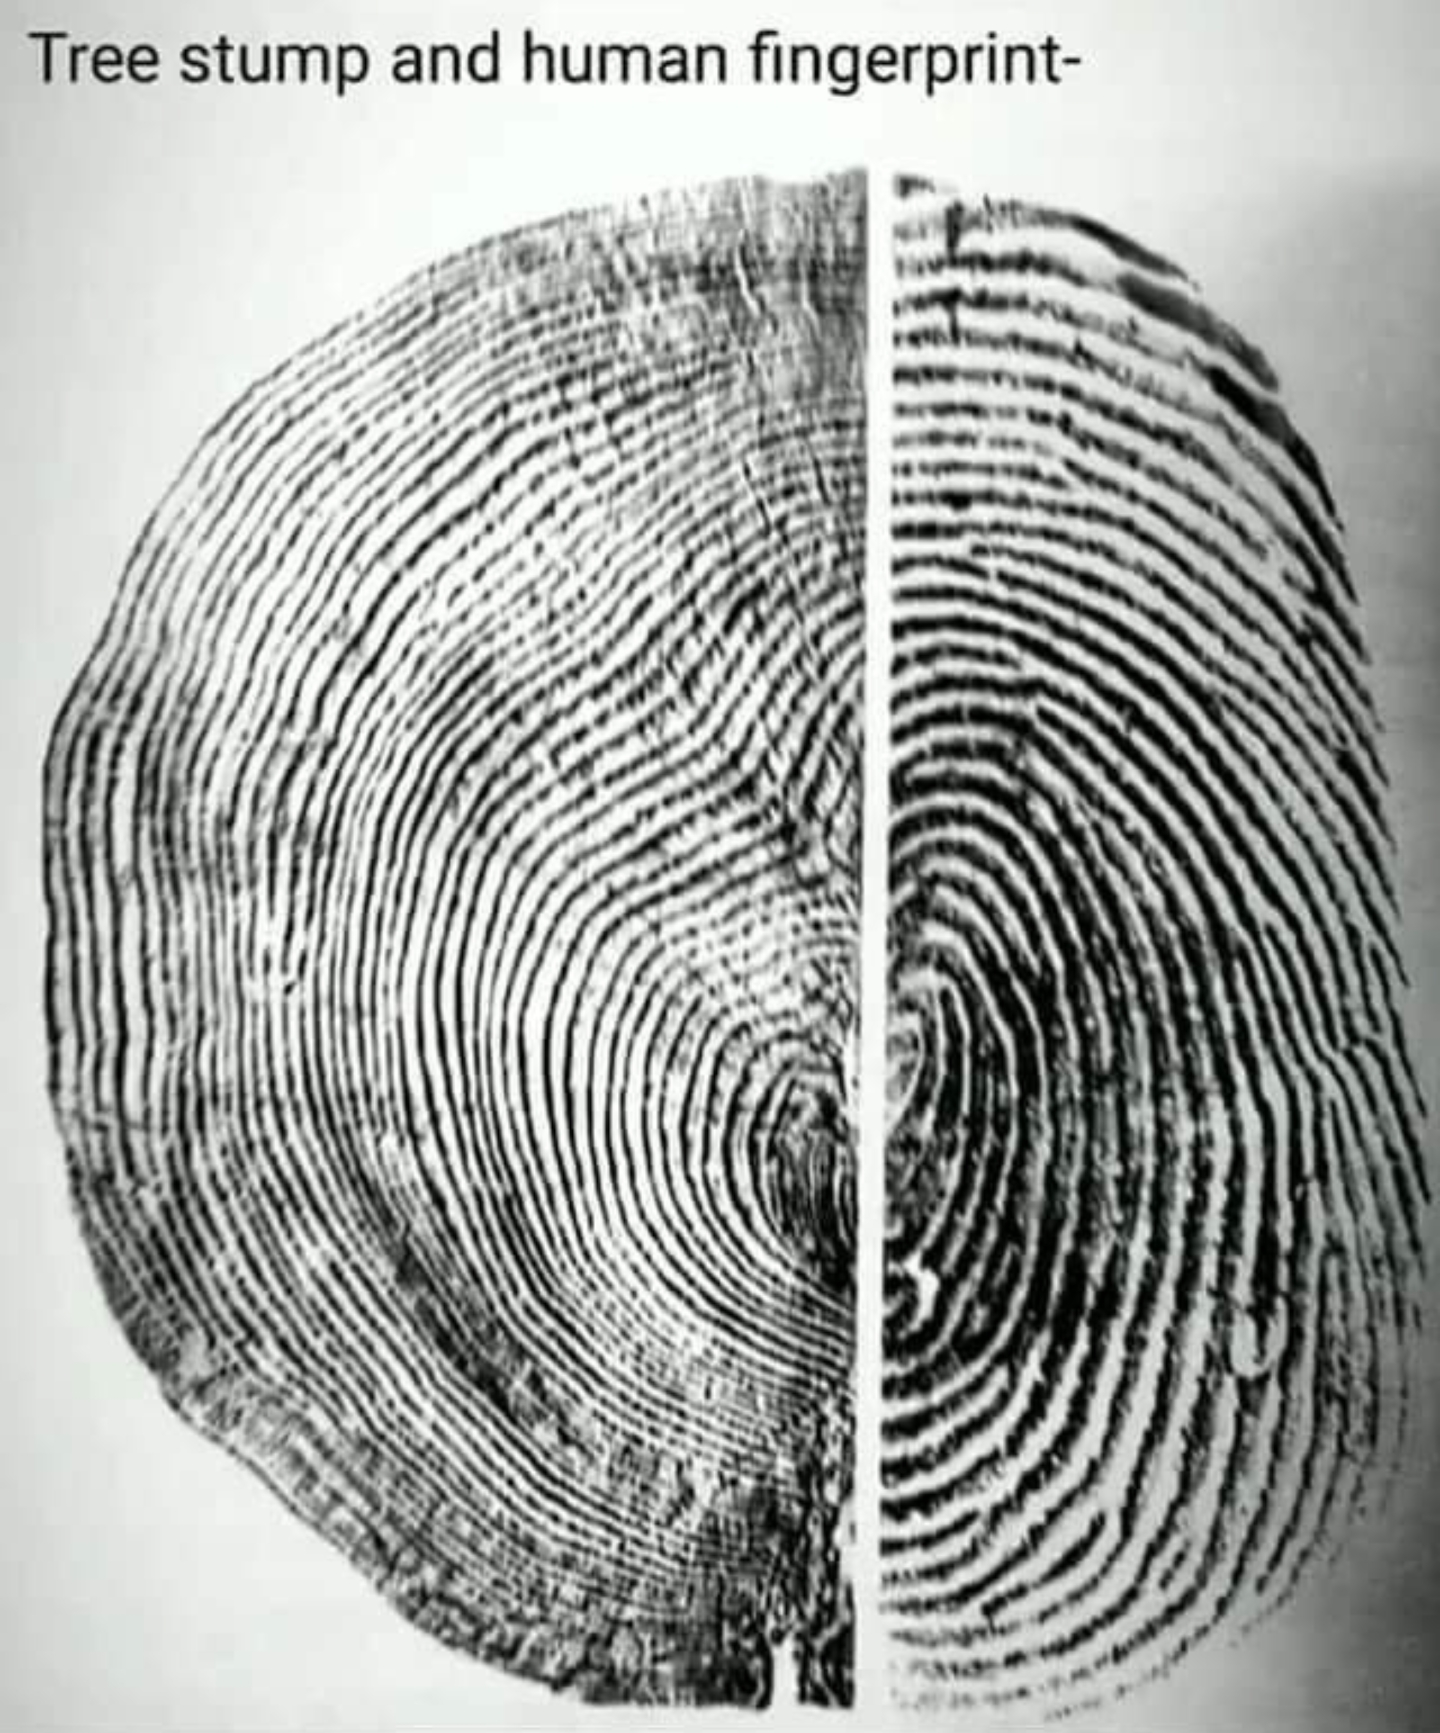 funny pics and memes - tree stump and fingerprint - Tree stump and human fingerprint